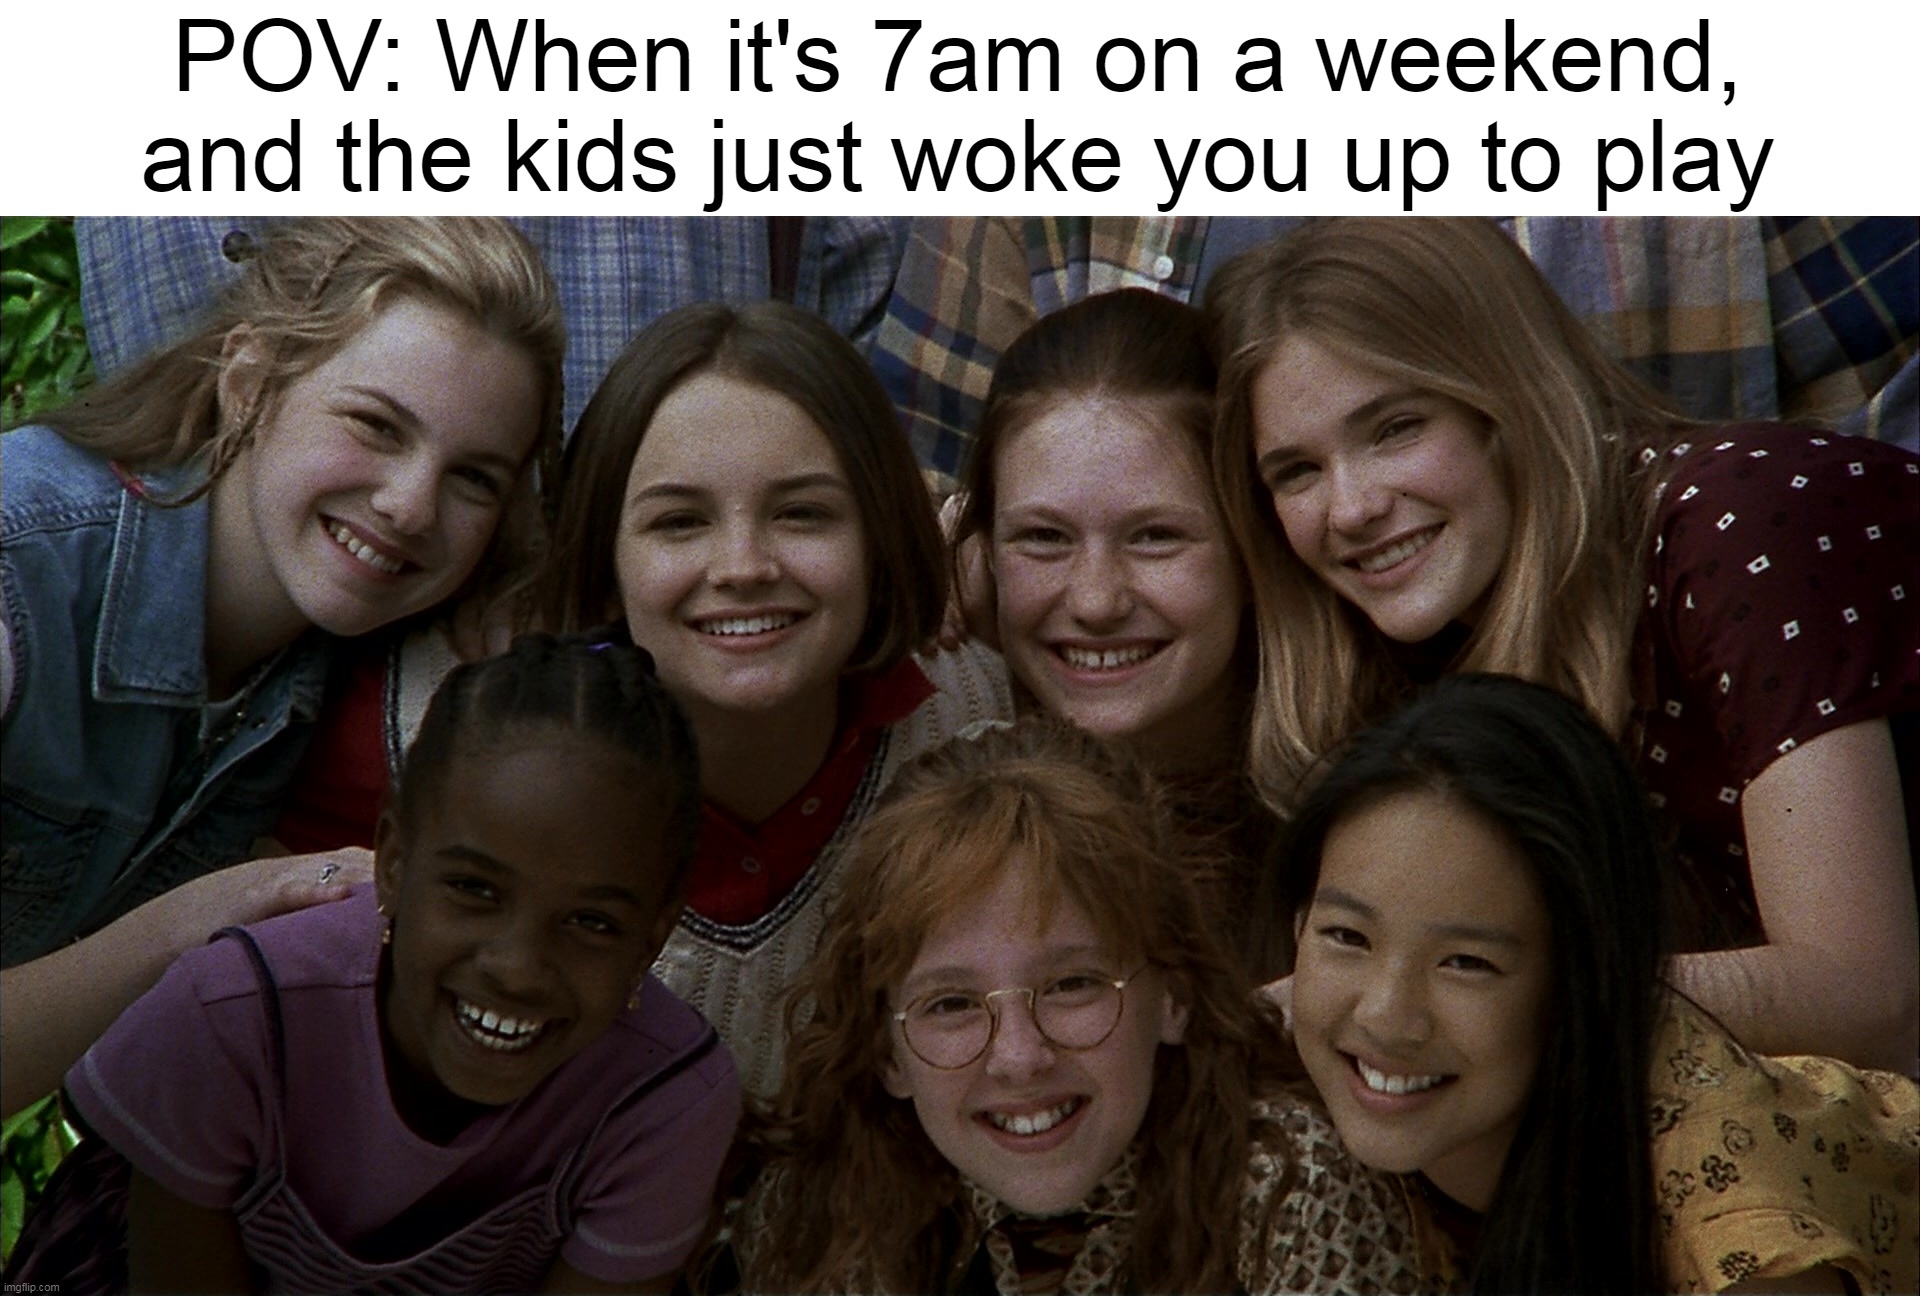 Not Ready for Any Joys of Parenthood, Yet? | POV: When it's 7am on a weekend, and the kids just woke you up to play | image tagged in meme,memes,humor,parents,pov,children | made w/ Imgflip meme maker